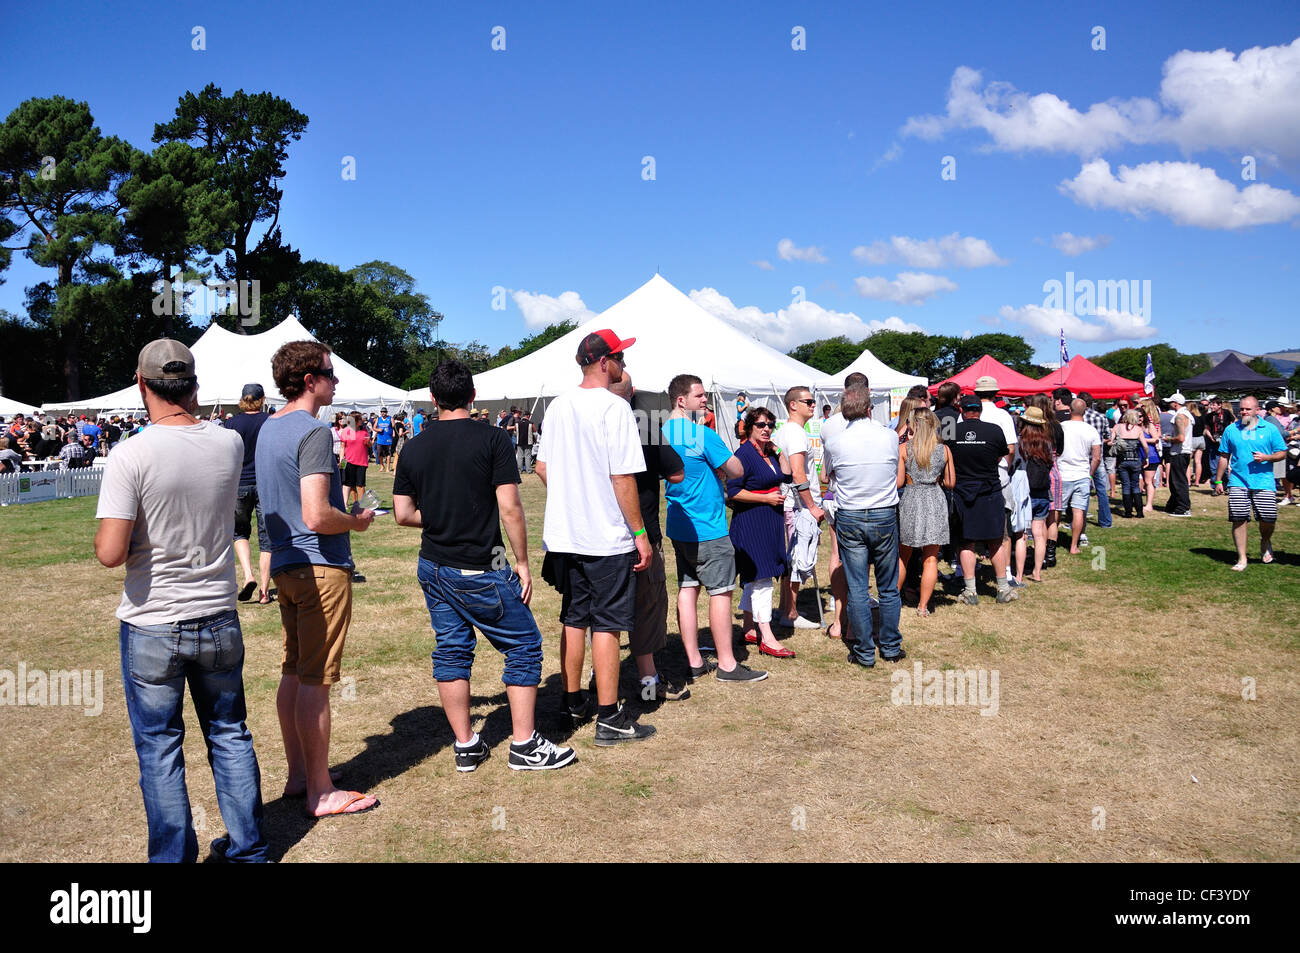 Queue for beer at The Great Kiwi Beer Festival, Hagley Park, Christchurch, Canterbury District, New Zealand Stock Photo